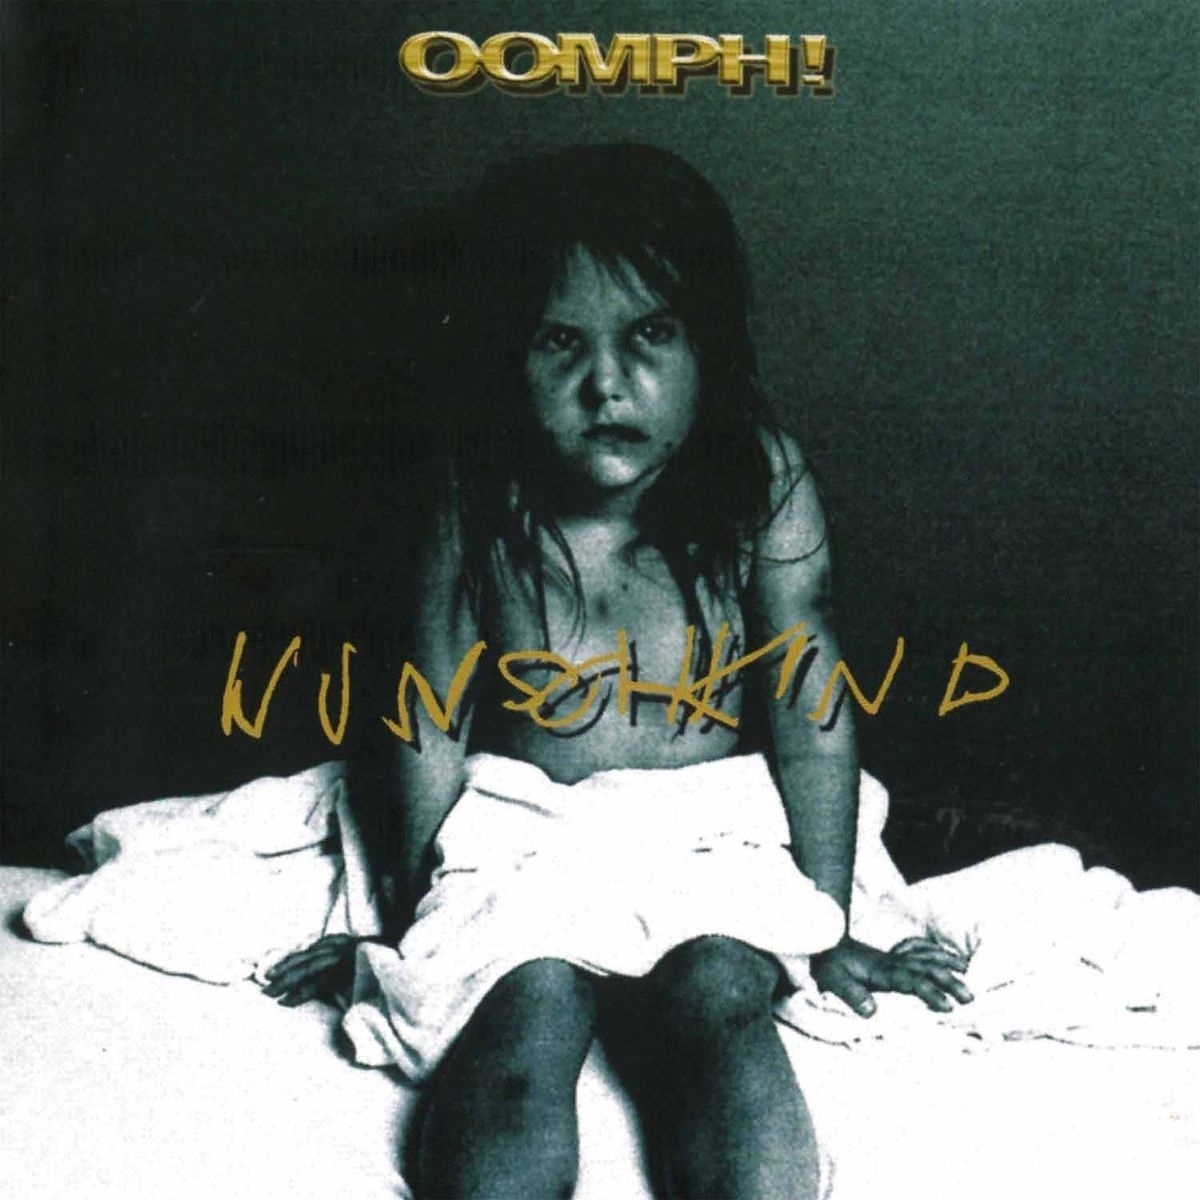 Wunschkind (Re-Release) - Oomph!. (CD)